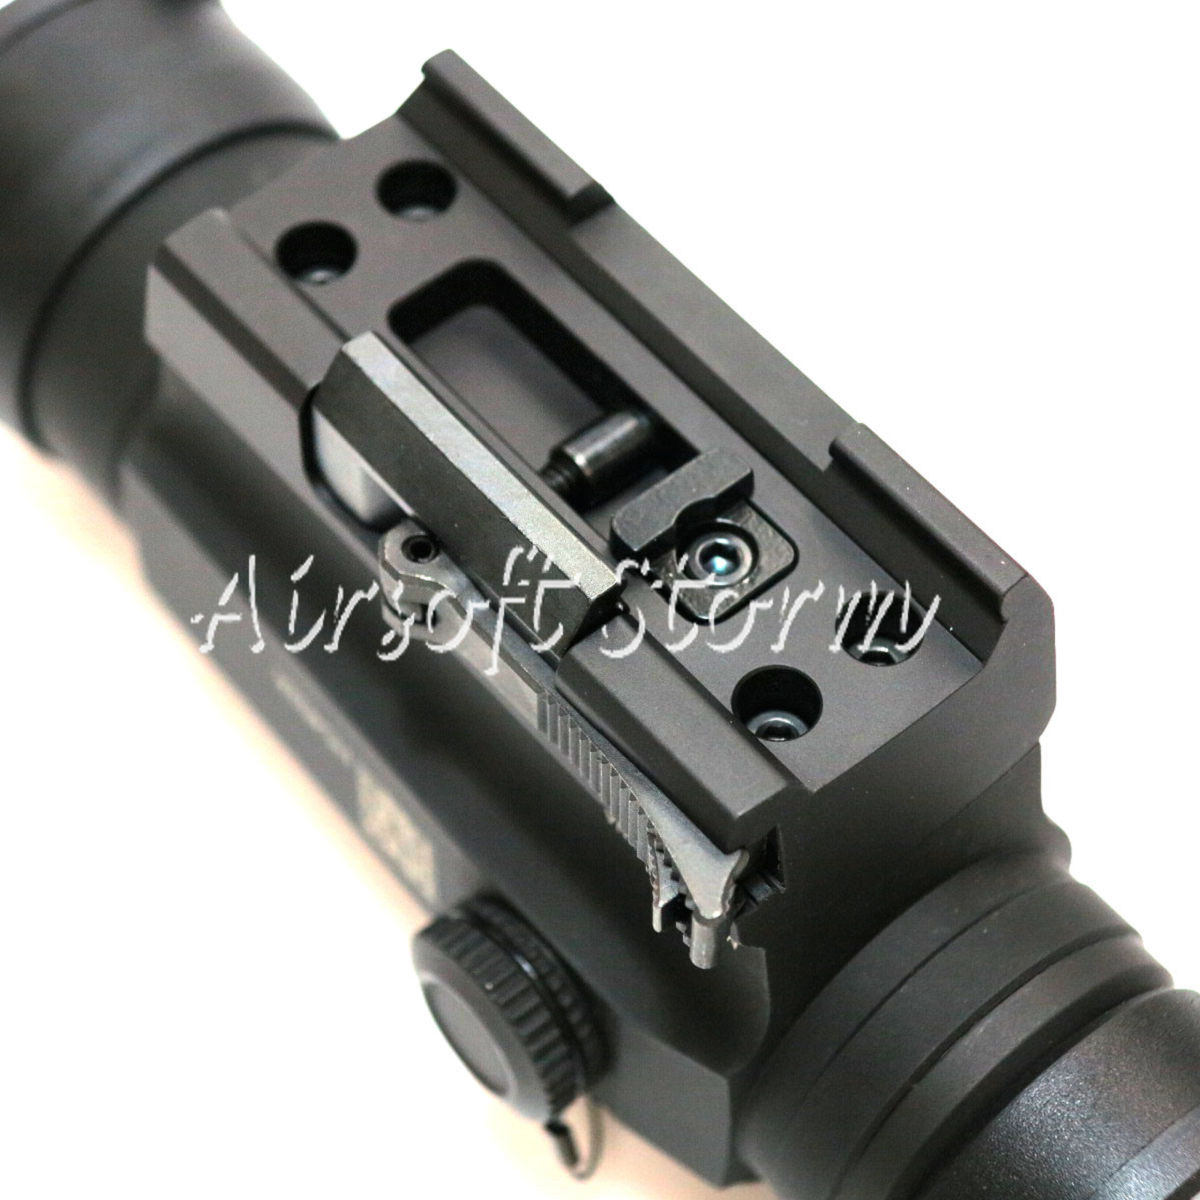 SWAT Gear Tactical Holosun HS402A 1x30 Red Dot Sight Scope - Click Image to Close